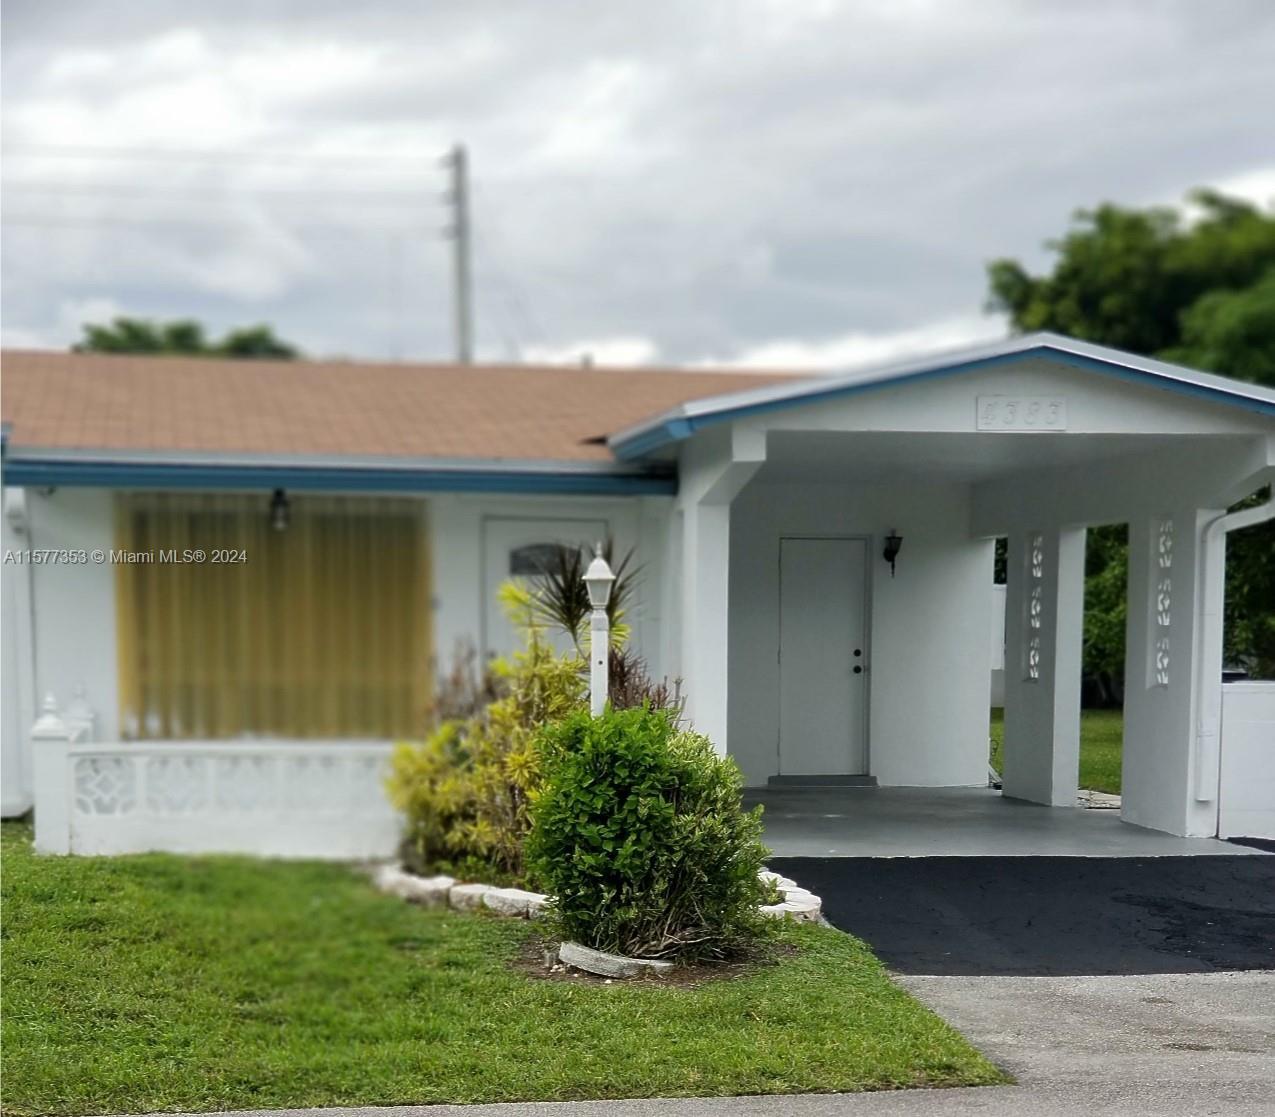 Photo of Address Not Disclosed in Lauderdale Lakes, FL